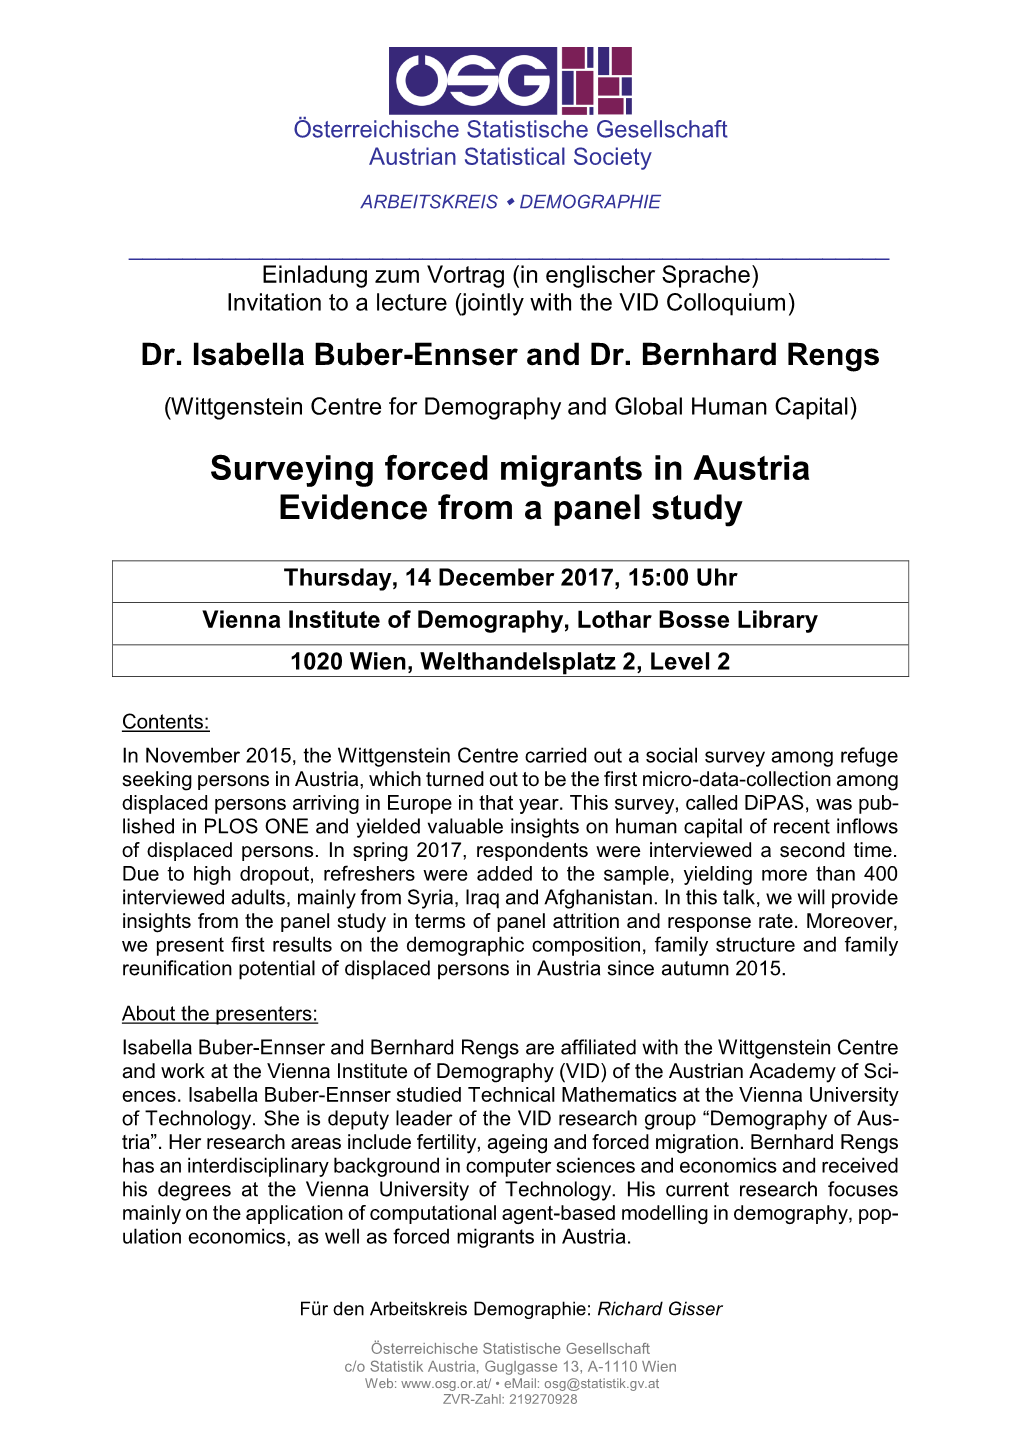 Surveying Forced Migrants in Austria Evidence from a Panel Study